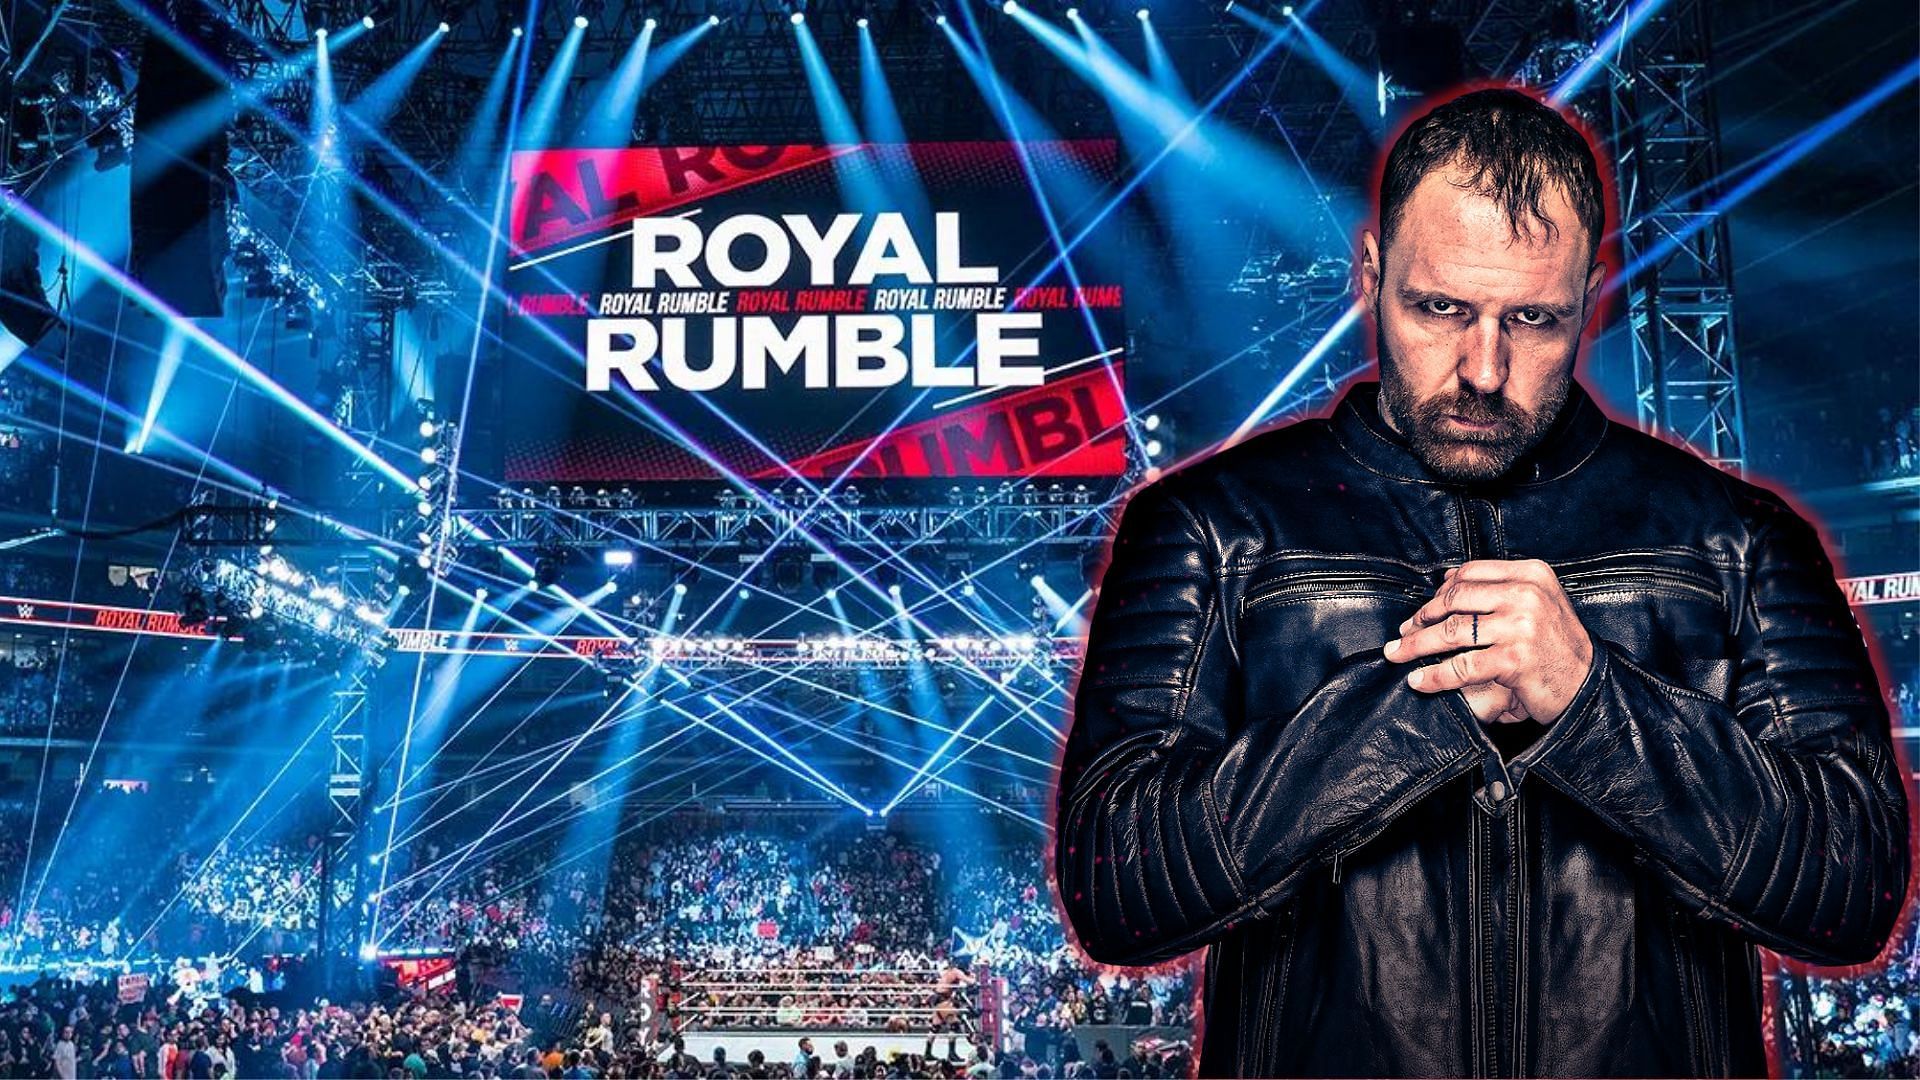 Several AEW stars came quite close to winning the Royal Rumble